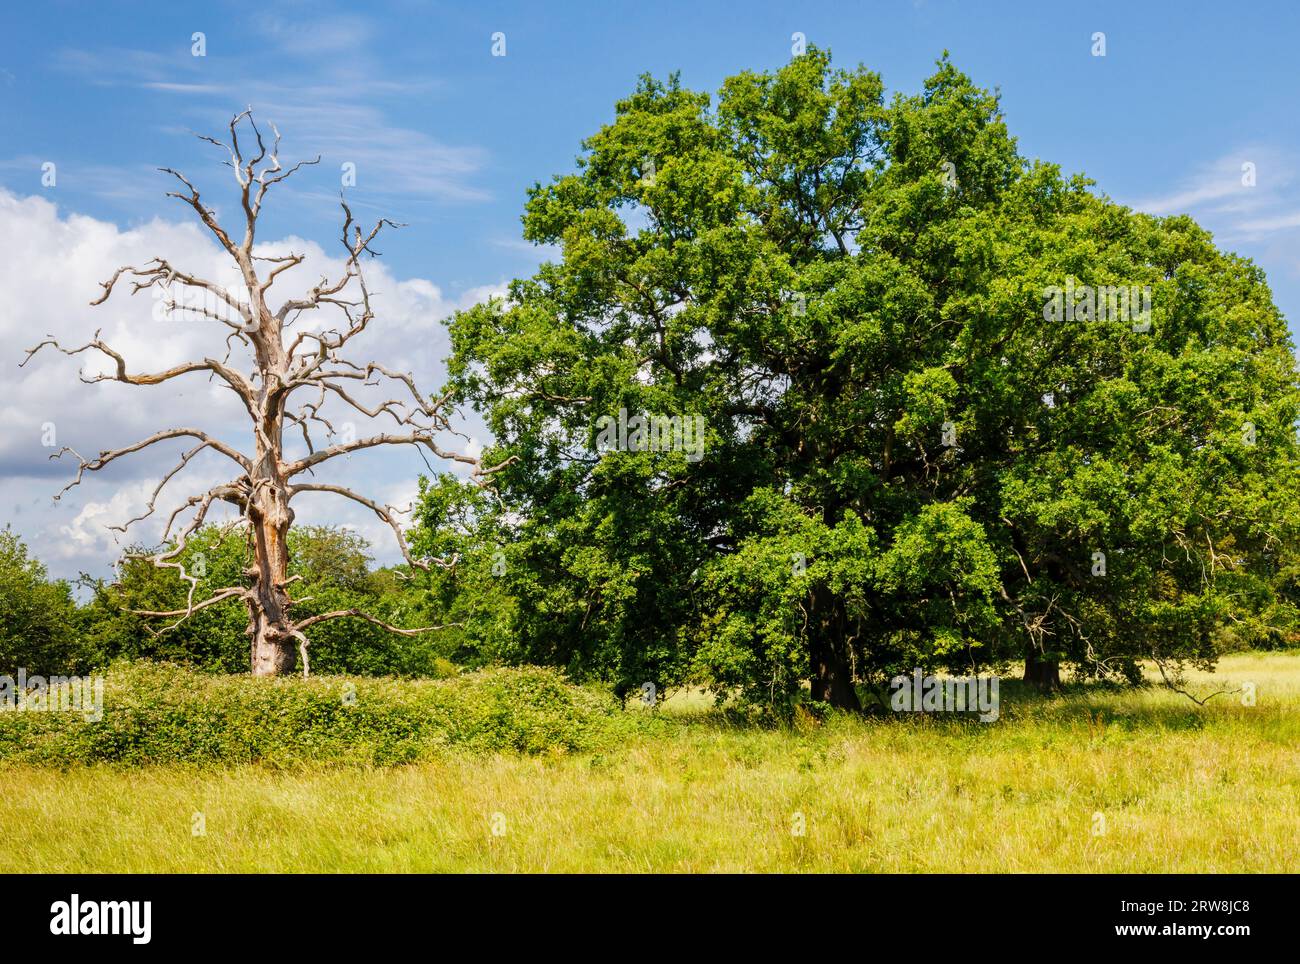 A living and a dead skeleton of an oak tree (Quercus robur) in parkland in Surrey, south-east England on a sunny day with blue sky and clouds Stock Photo